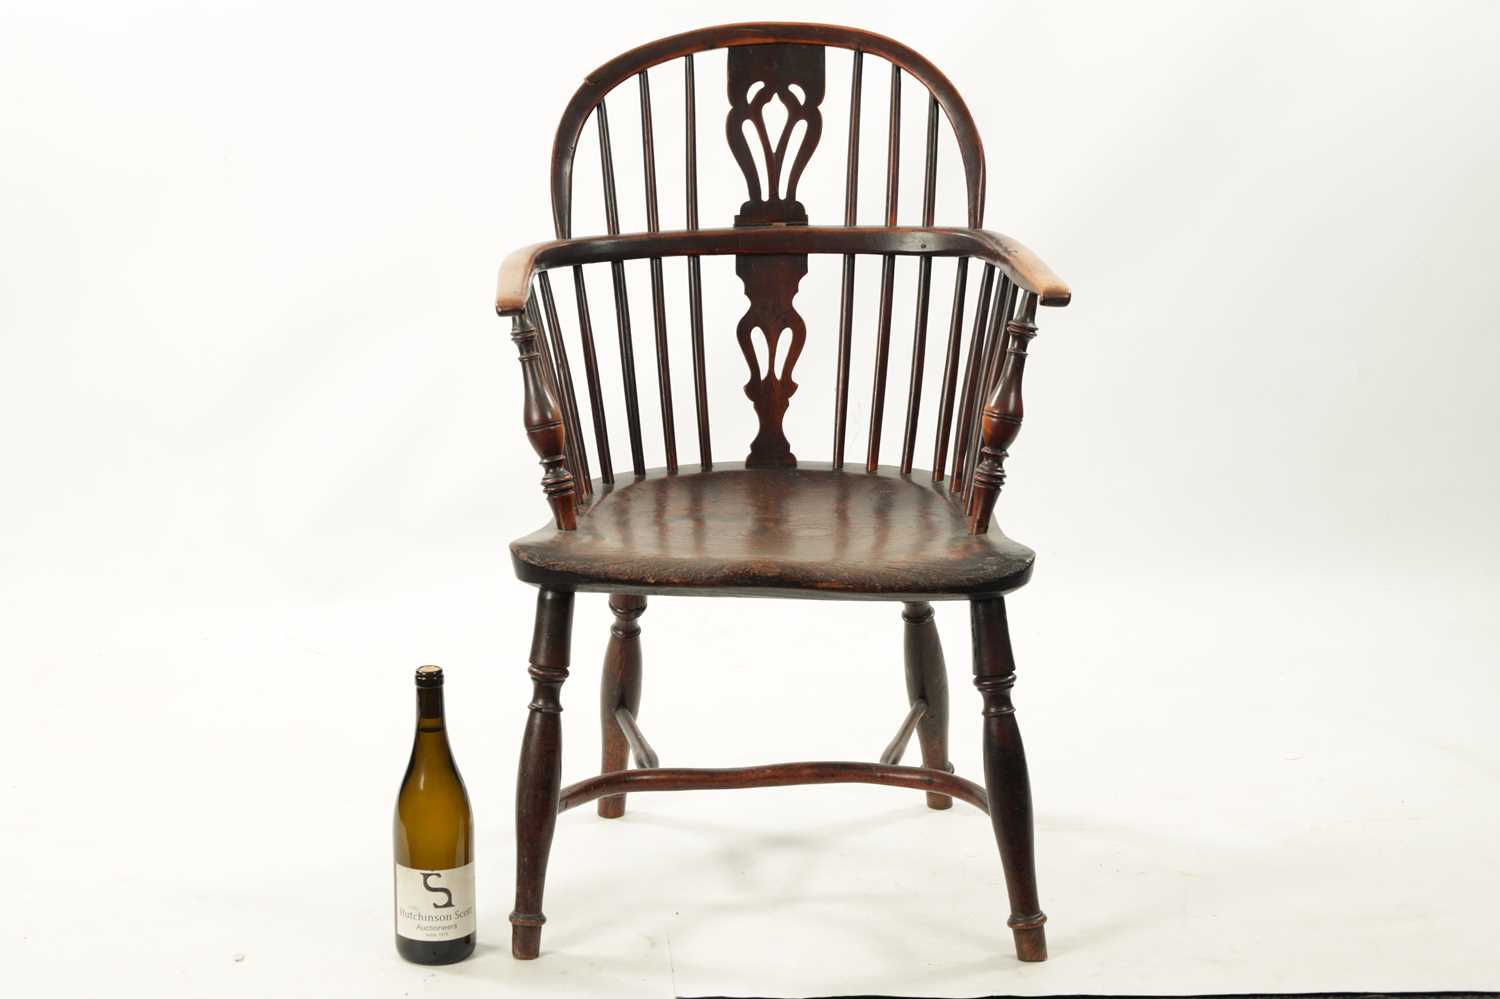 AN EARLY 19TH CENTURY YEW WOOD LOW BACK WINDSOR CHAIR - Image 3 of 6